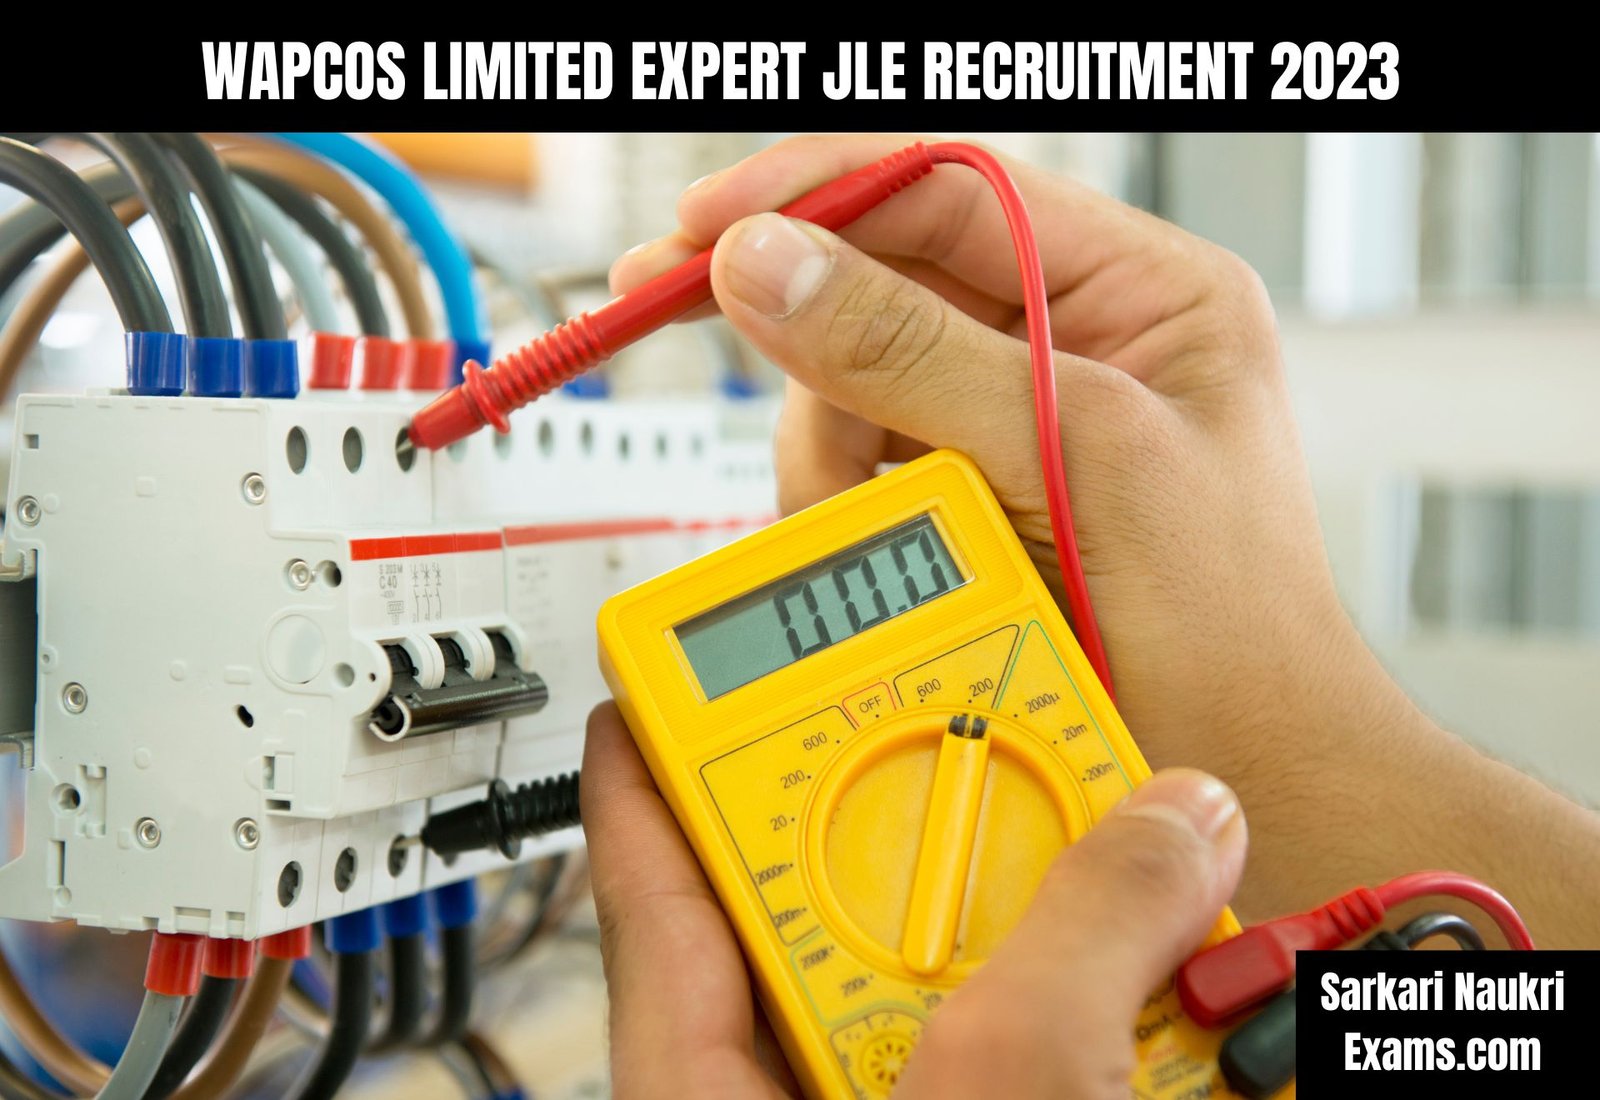 WAPCOS Limited Expert JLE Recruitment Form 2023 | Interview Based Job